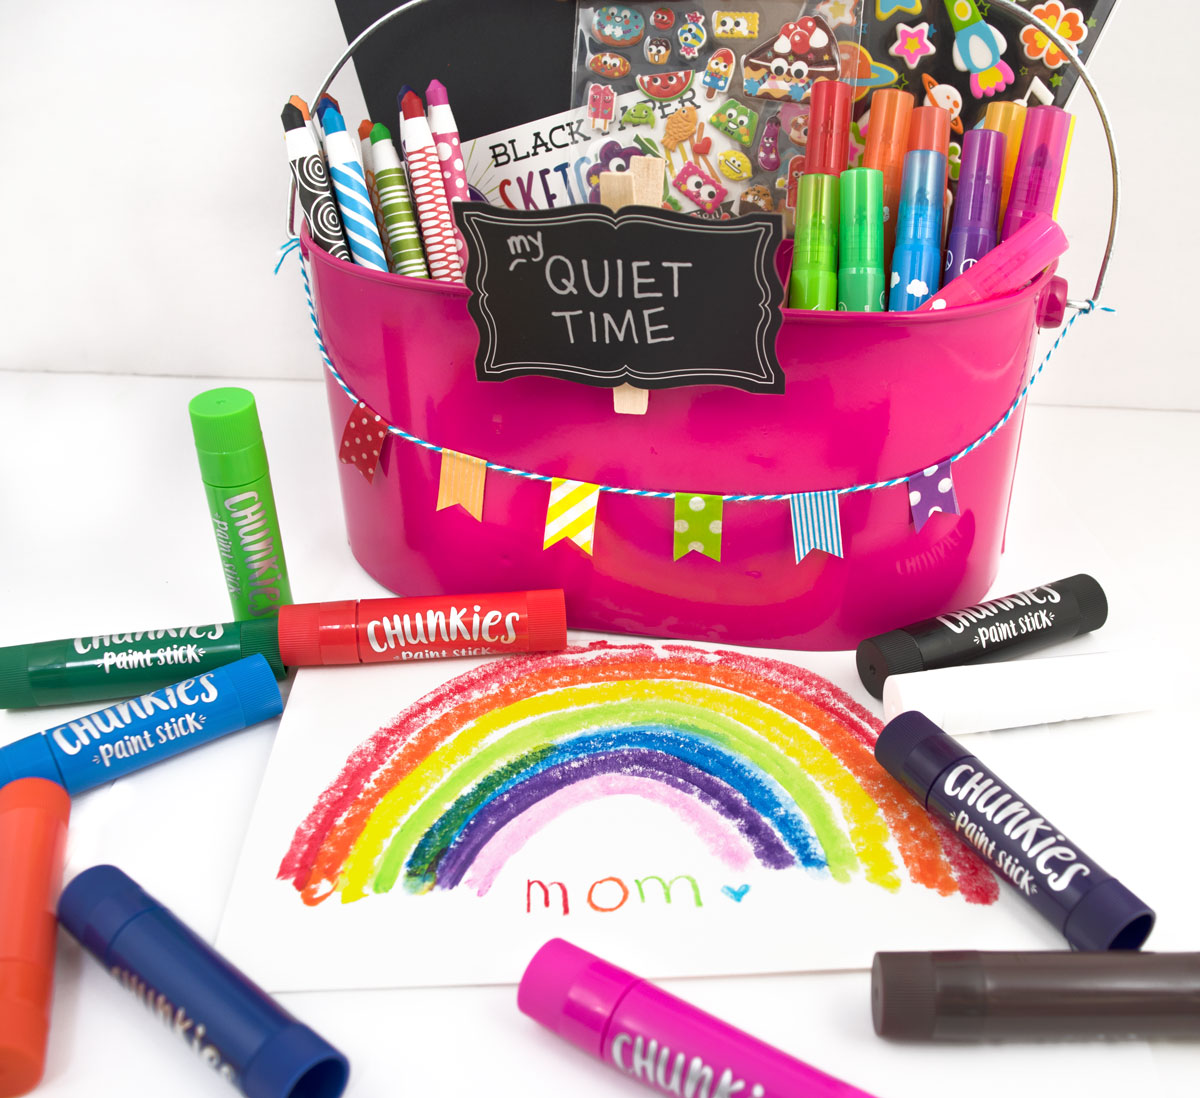 Kids art supply basket with crayons, markers, paint sticks, stickers and a card for mother's day.